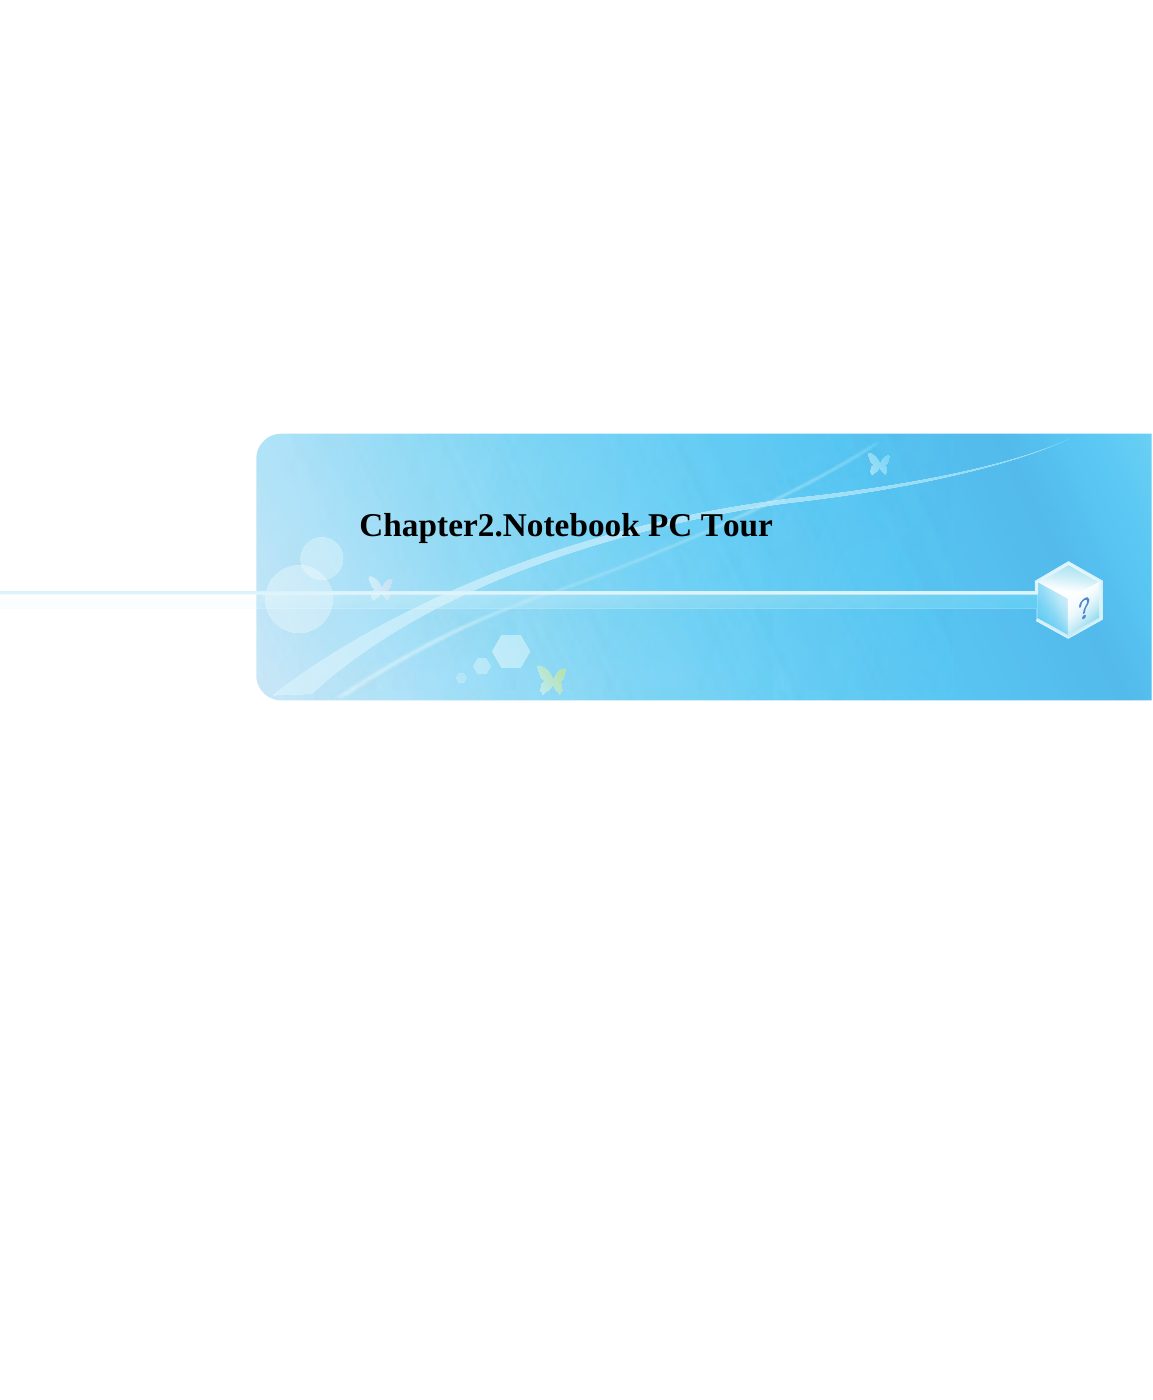 Chapter2.Notebook PC Tour